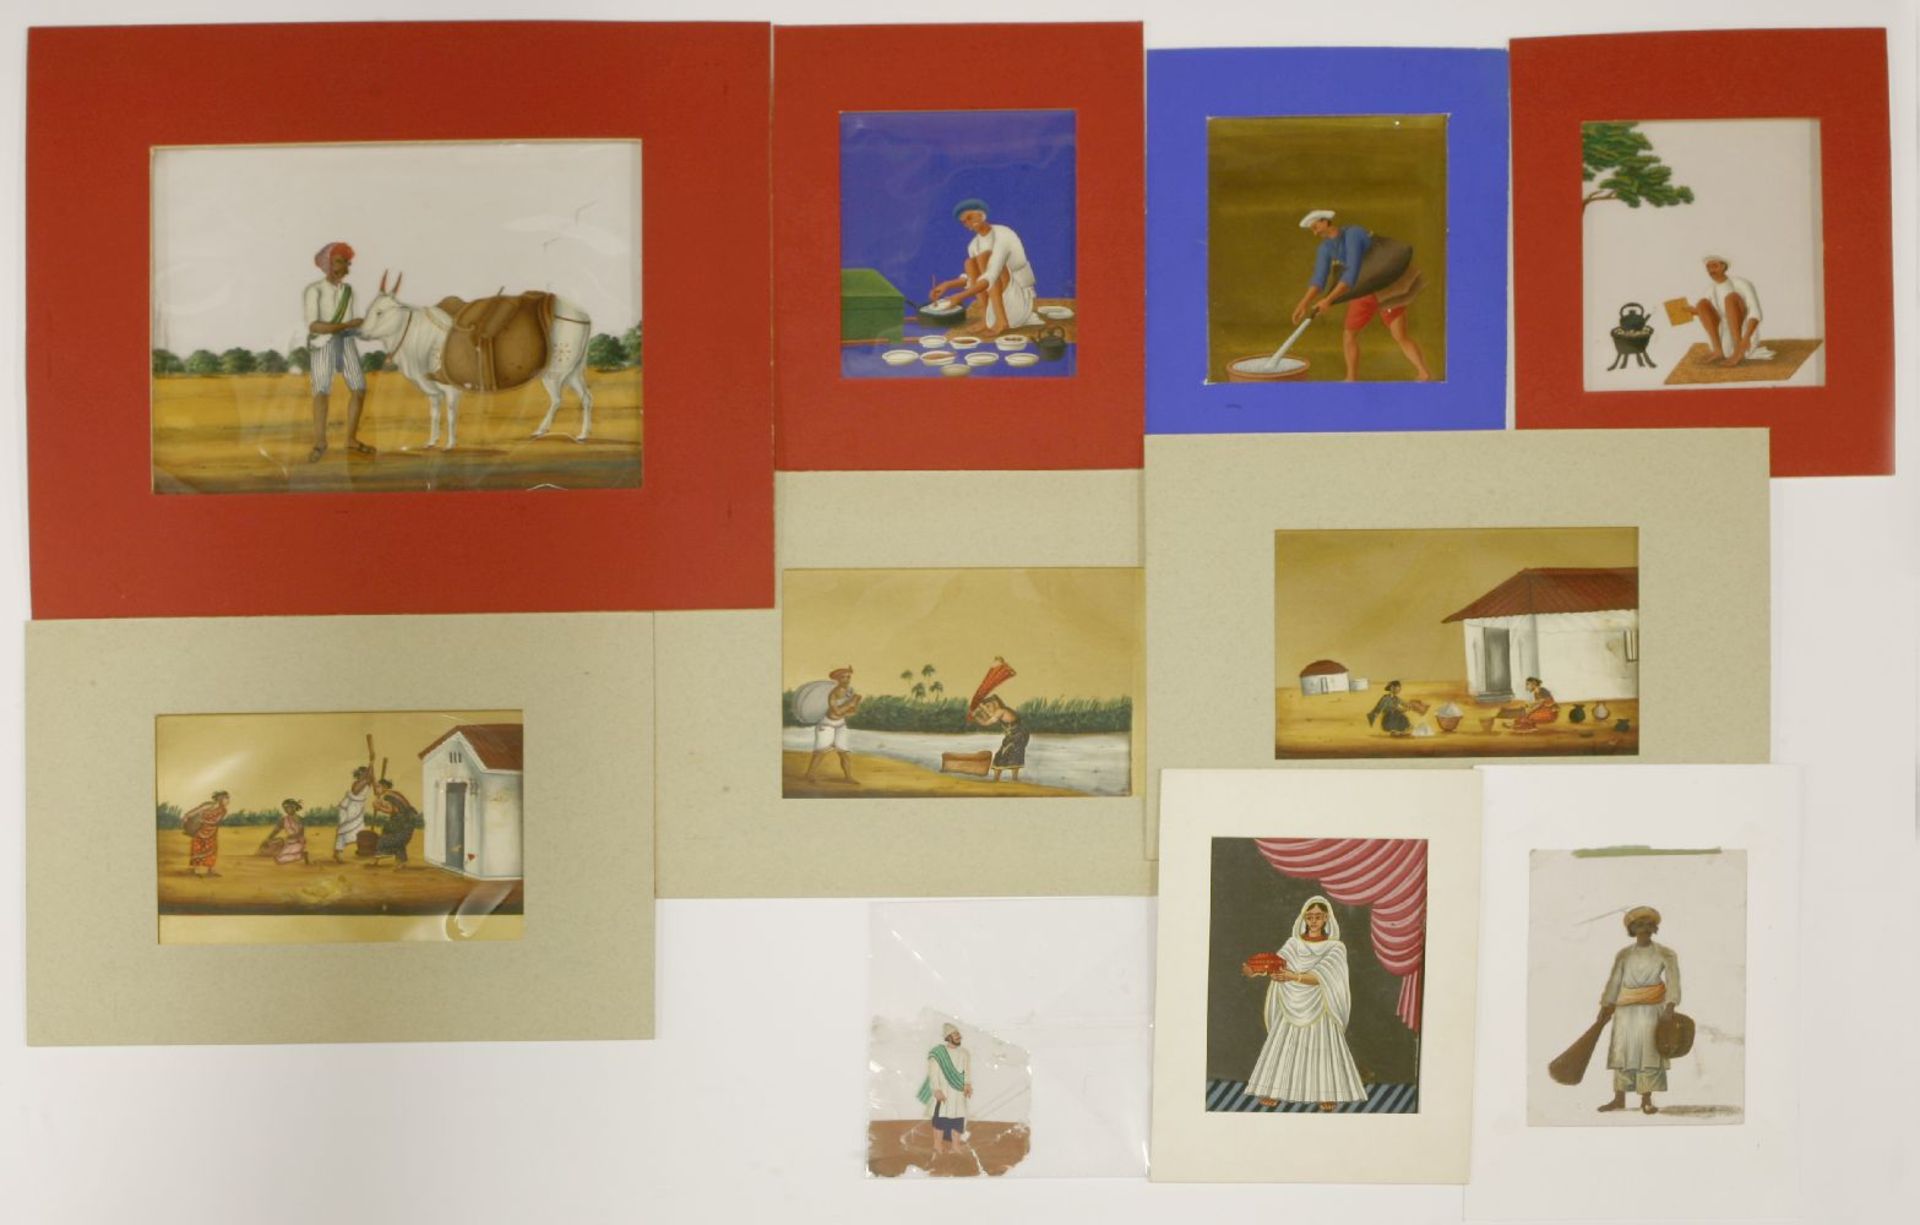 Fourteen Indian paintings on mica,mid-19th century, representing various occupations,largest 16 x